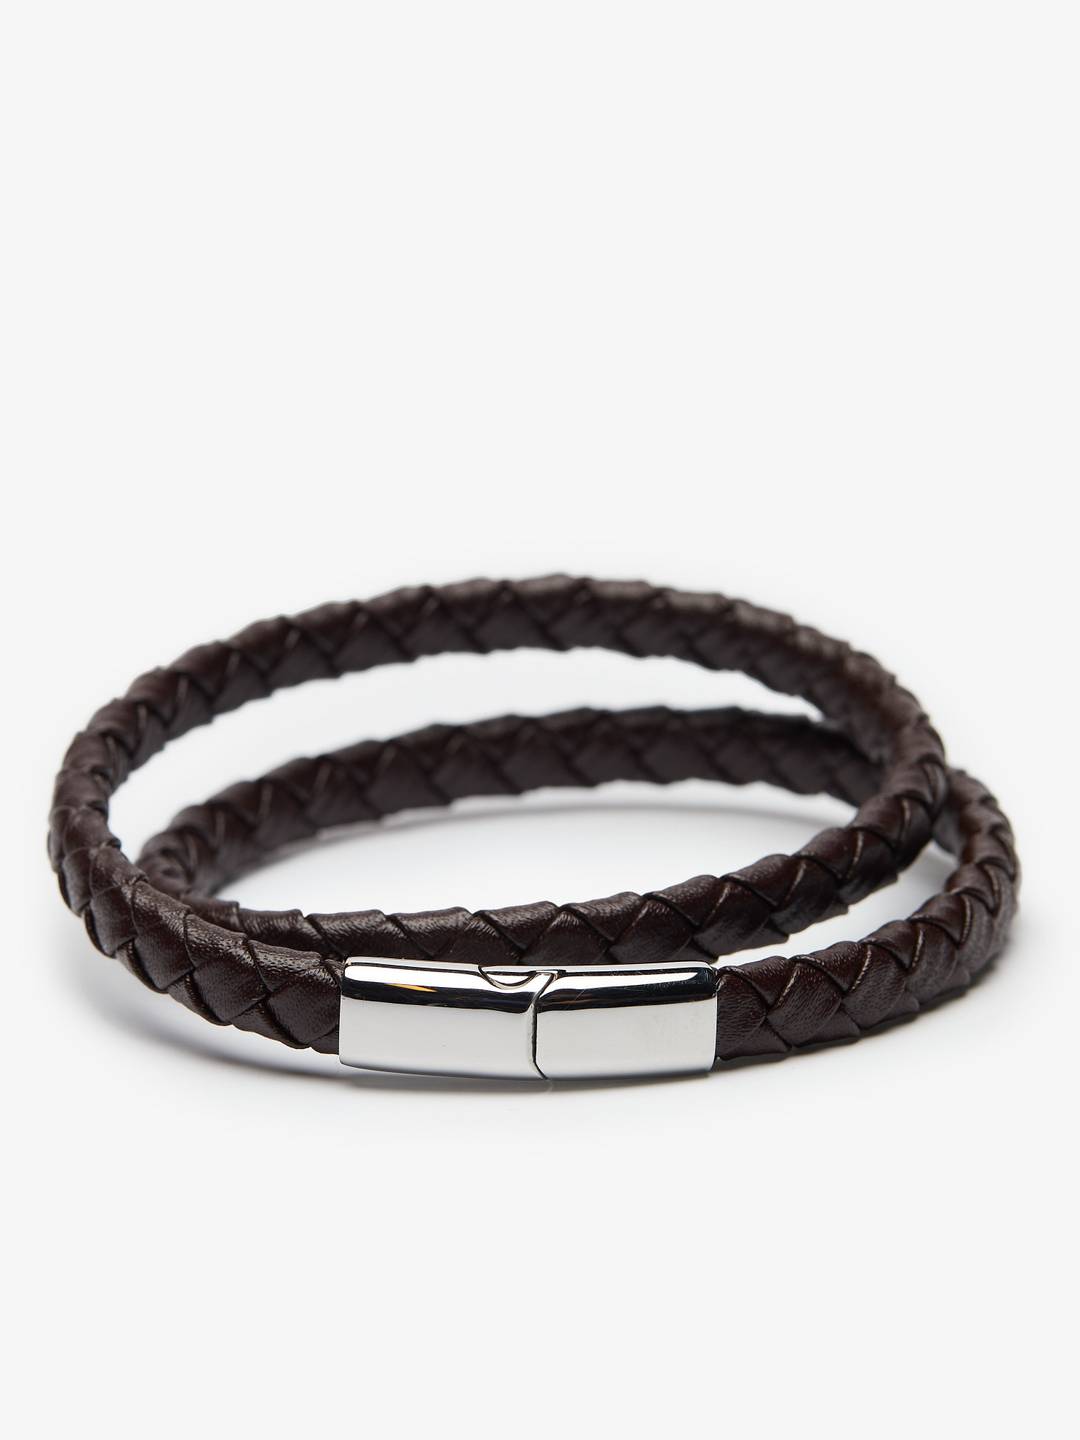 Triangle Letter Cowhide H Samuel Bracelets For Men And Women European And  American Style With Hundred Matching Decorations From Ewjyy, $38.38 |  DHgate.Com